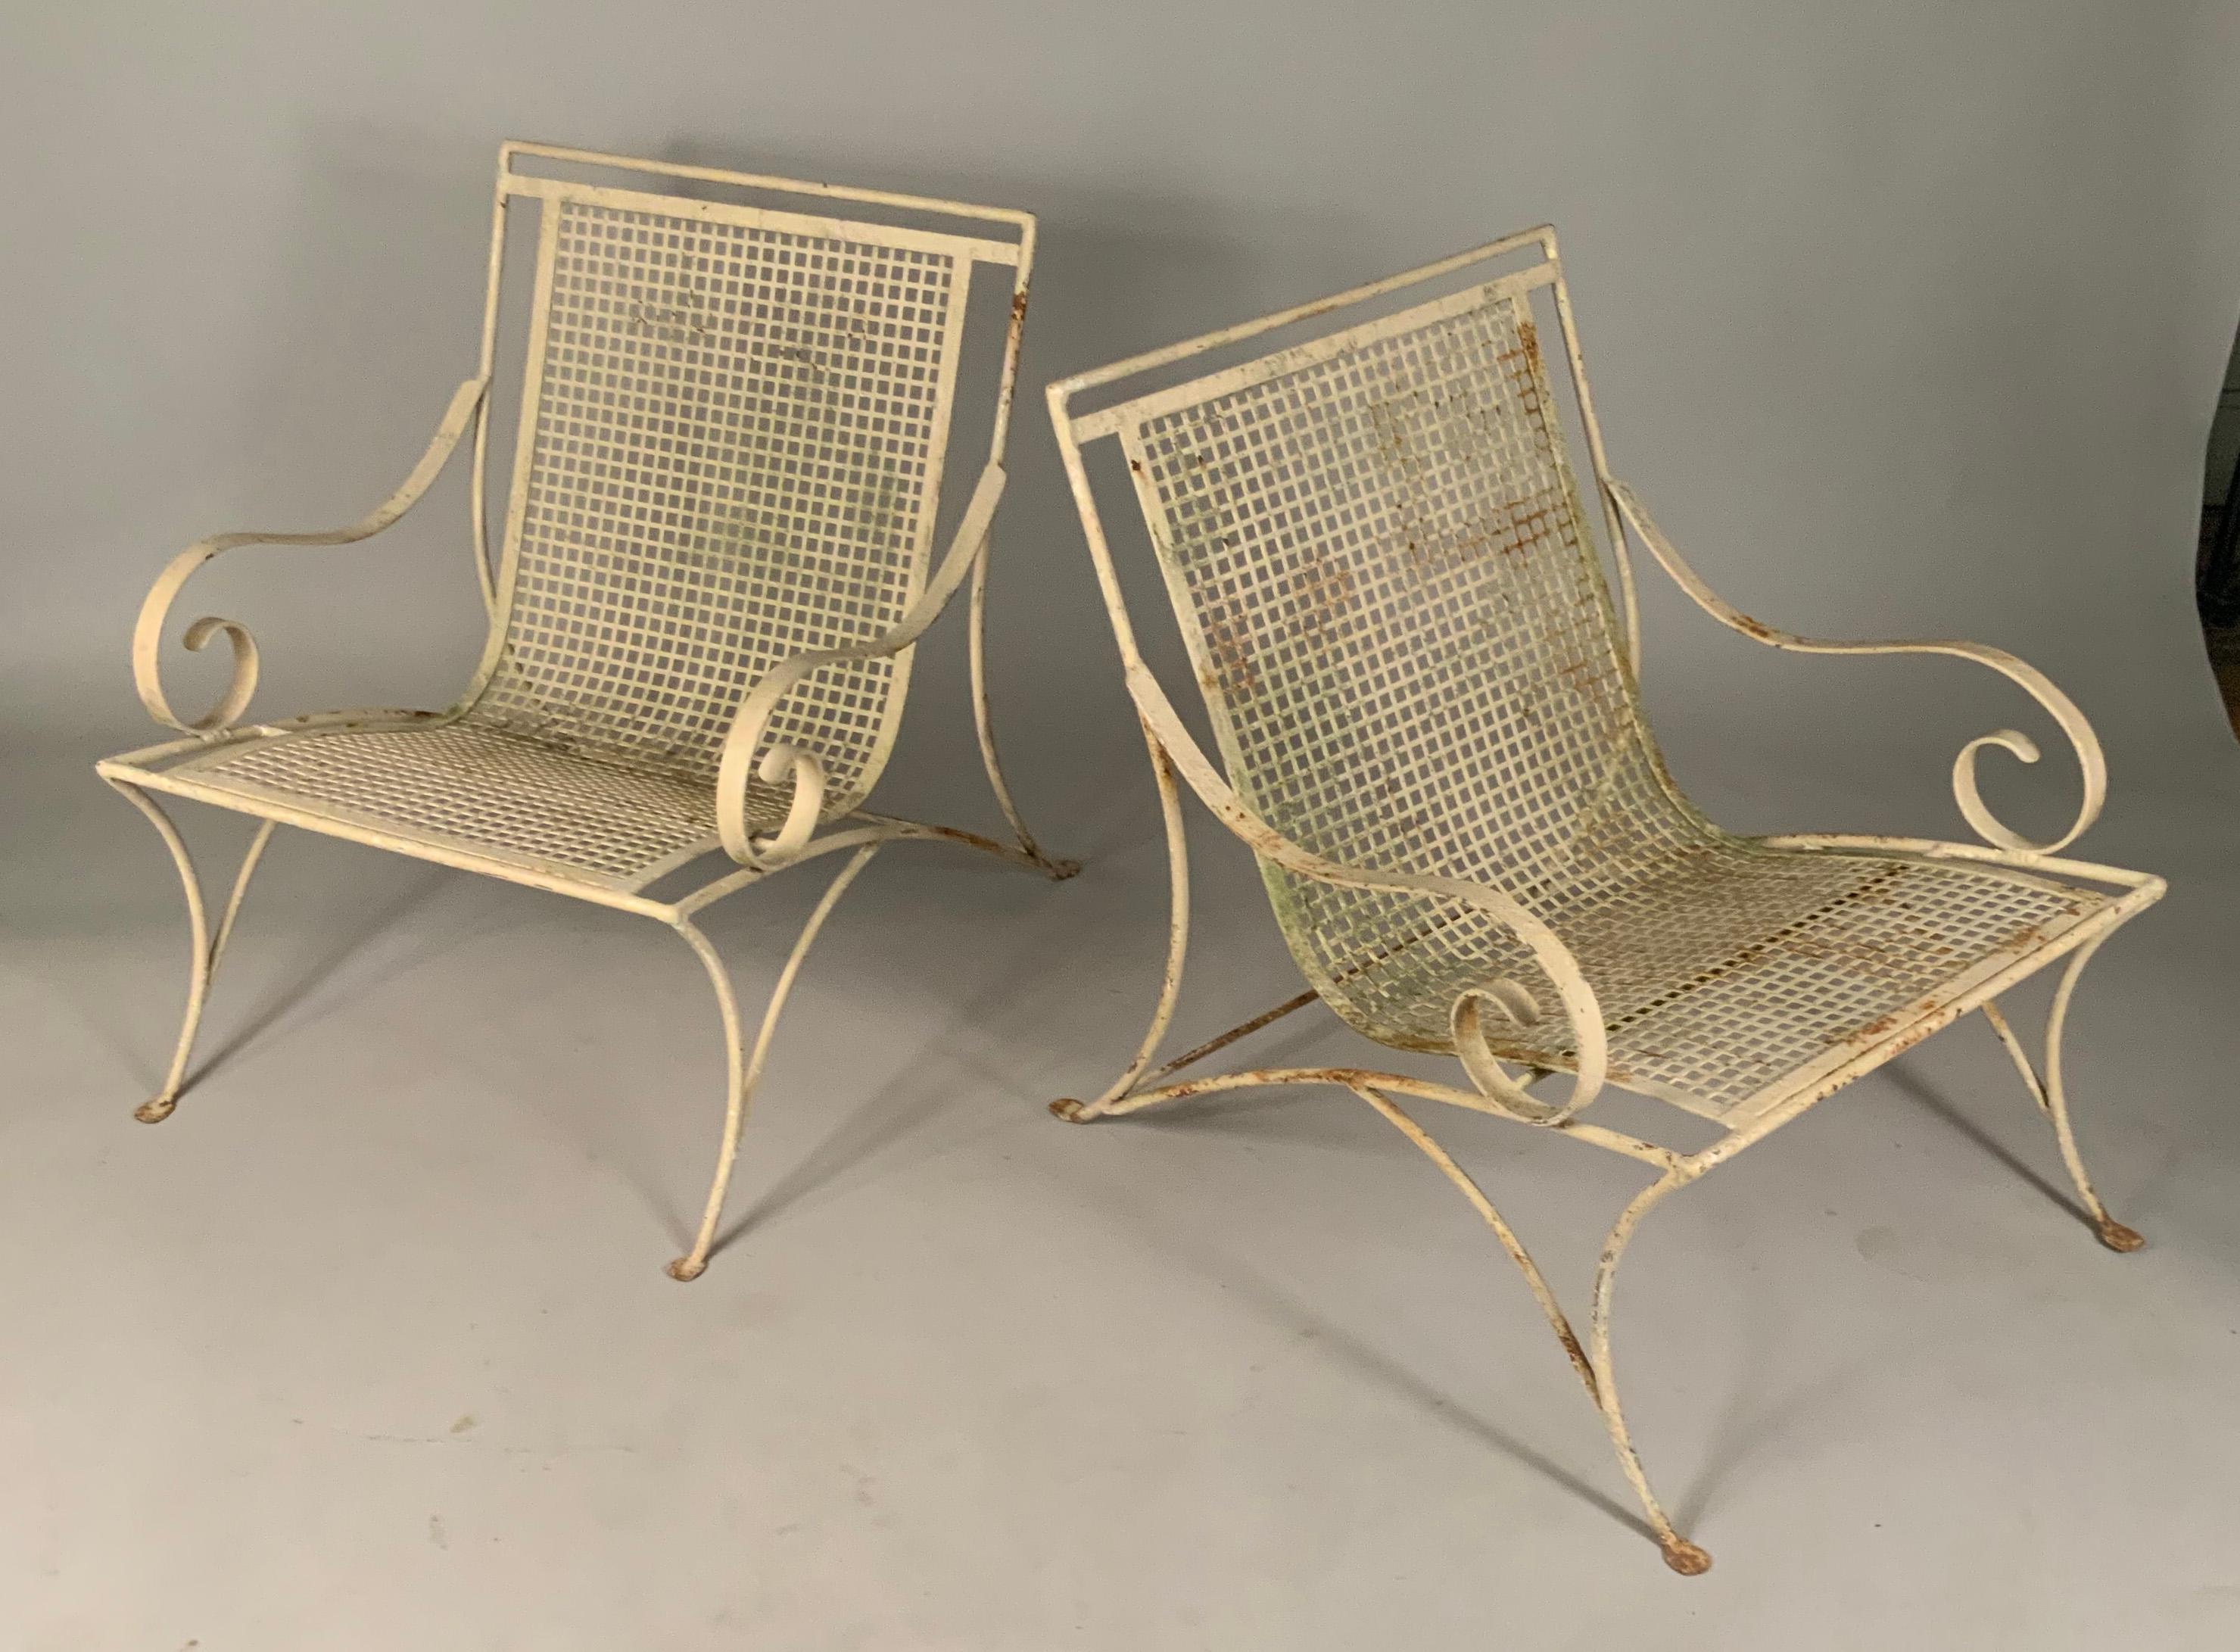 a very engaging pair of vintage 1960's wrought iron lounge chairs, with beautifully scrolled frames, and a grid pattern seat and back. great stylish design and very well made. the original finish is worn, but these could easily be stripped and